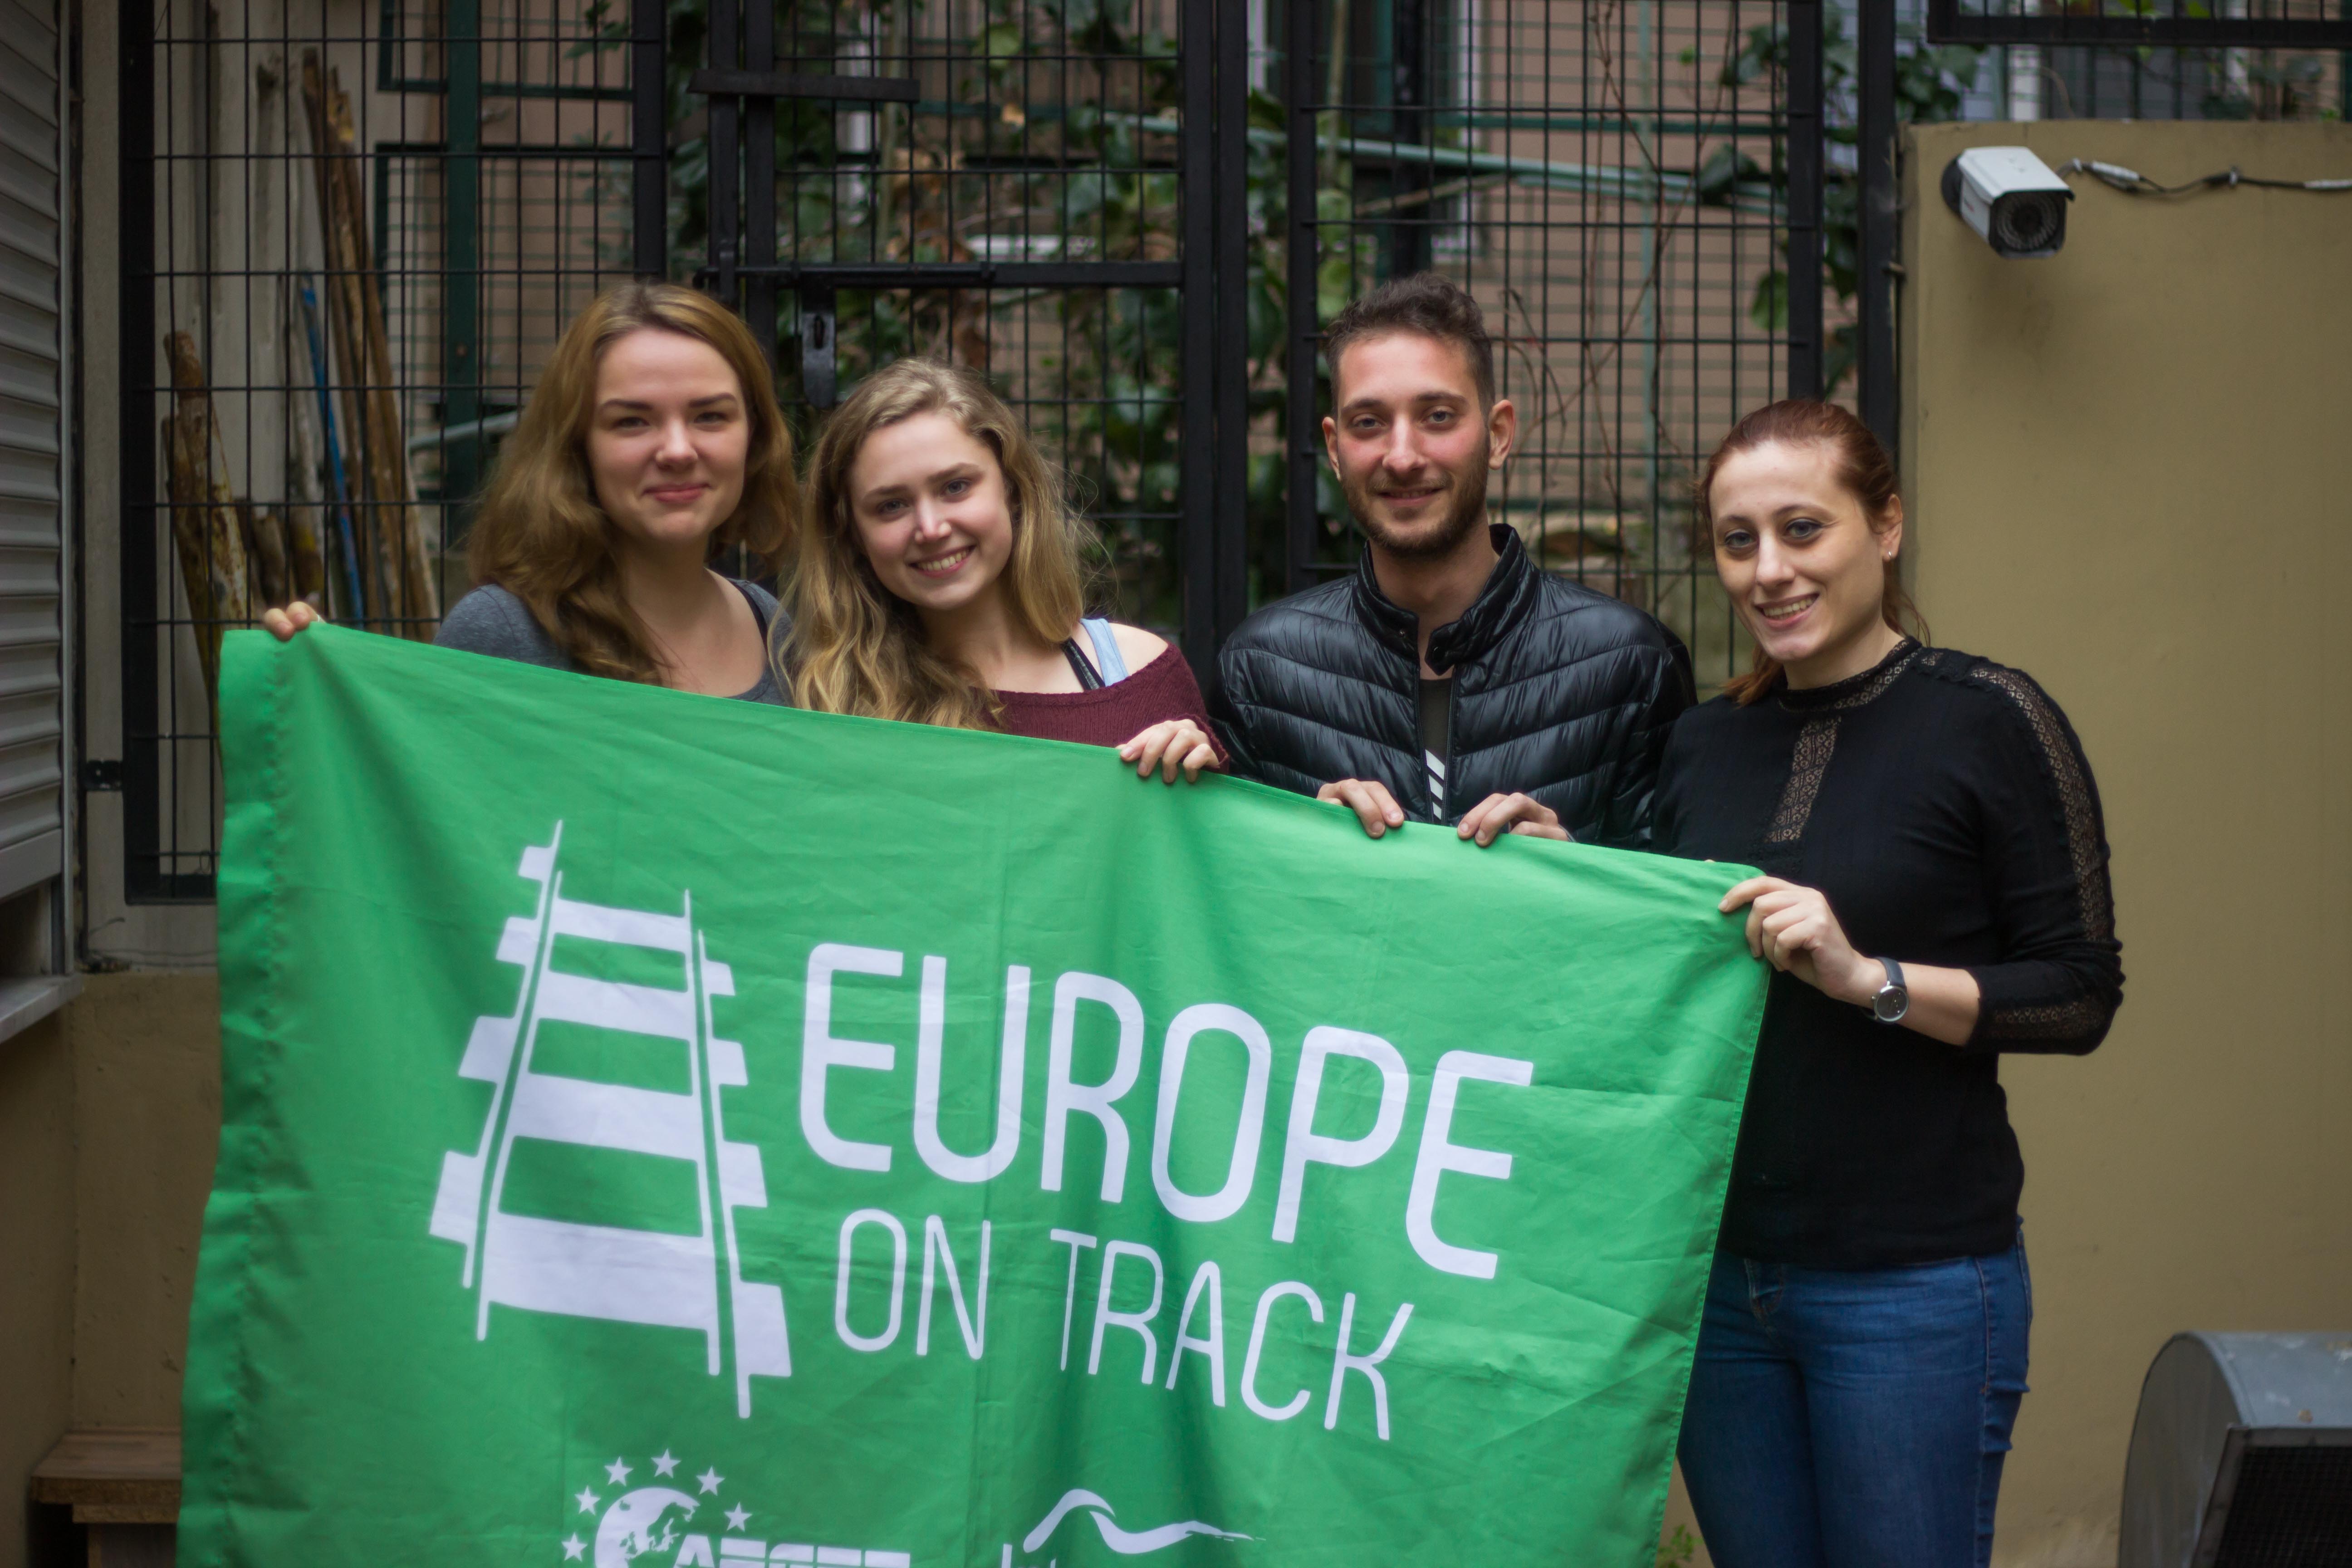 About the Project – Europe on Track